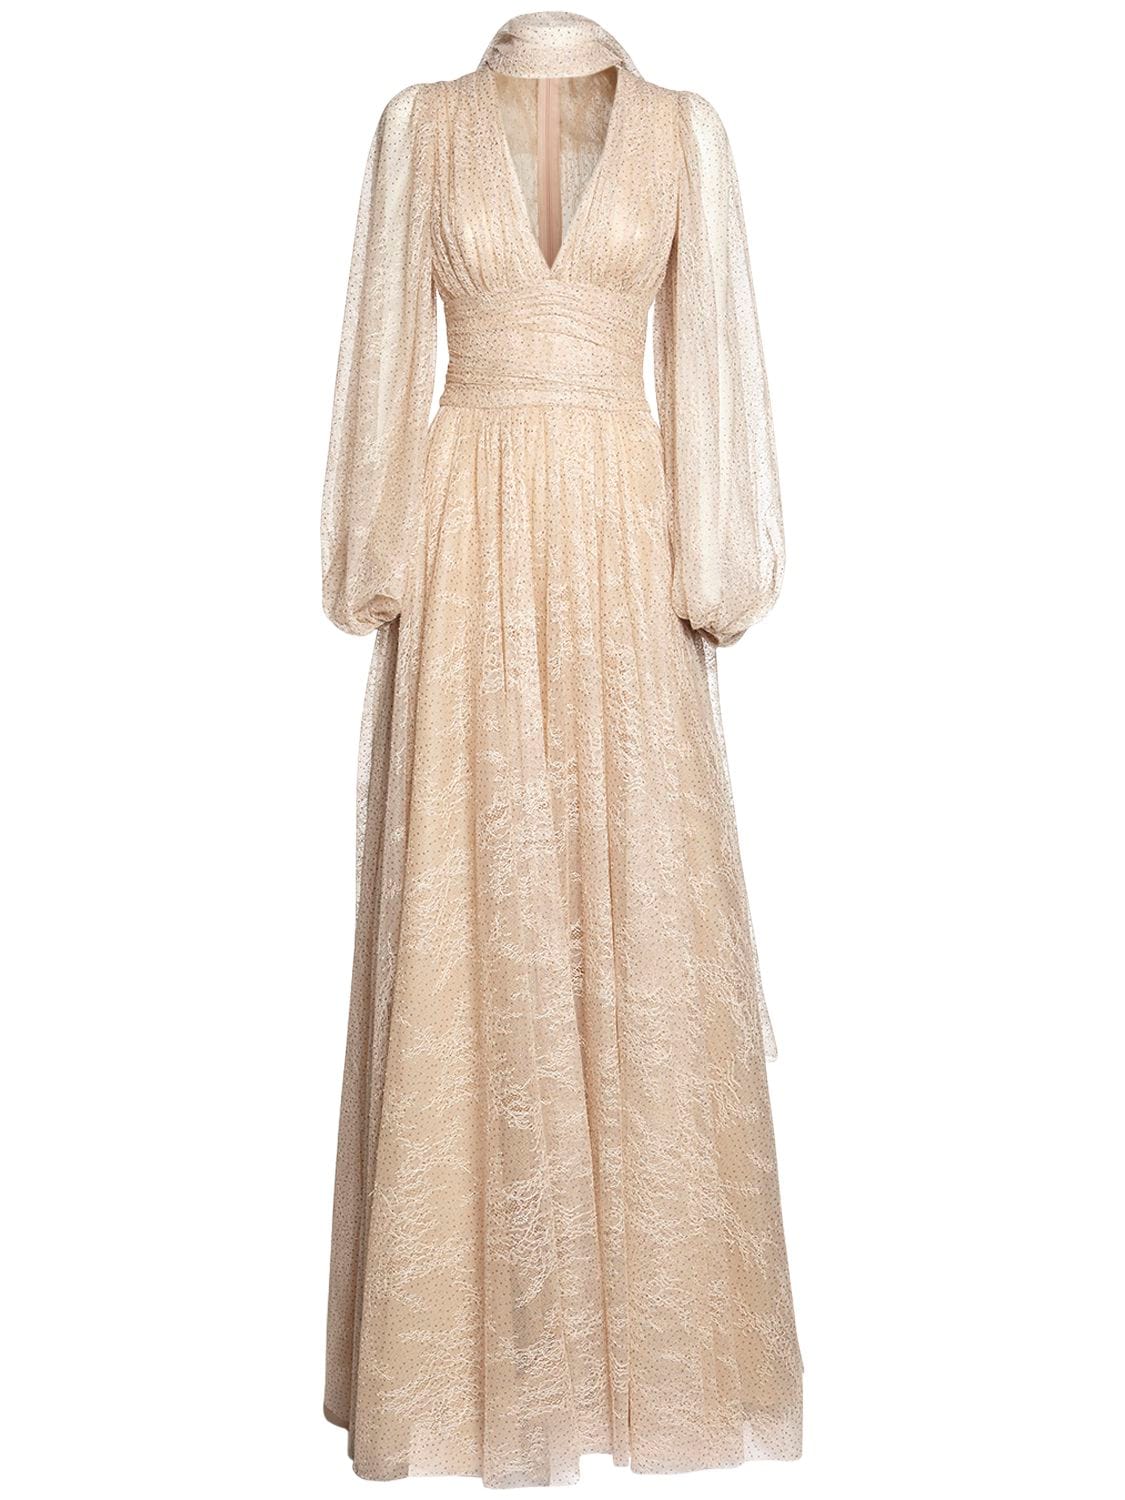 Luisa Beccaria Embellished Lace Long Dress In Cream